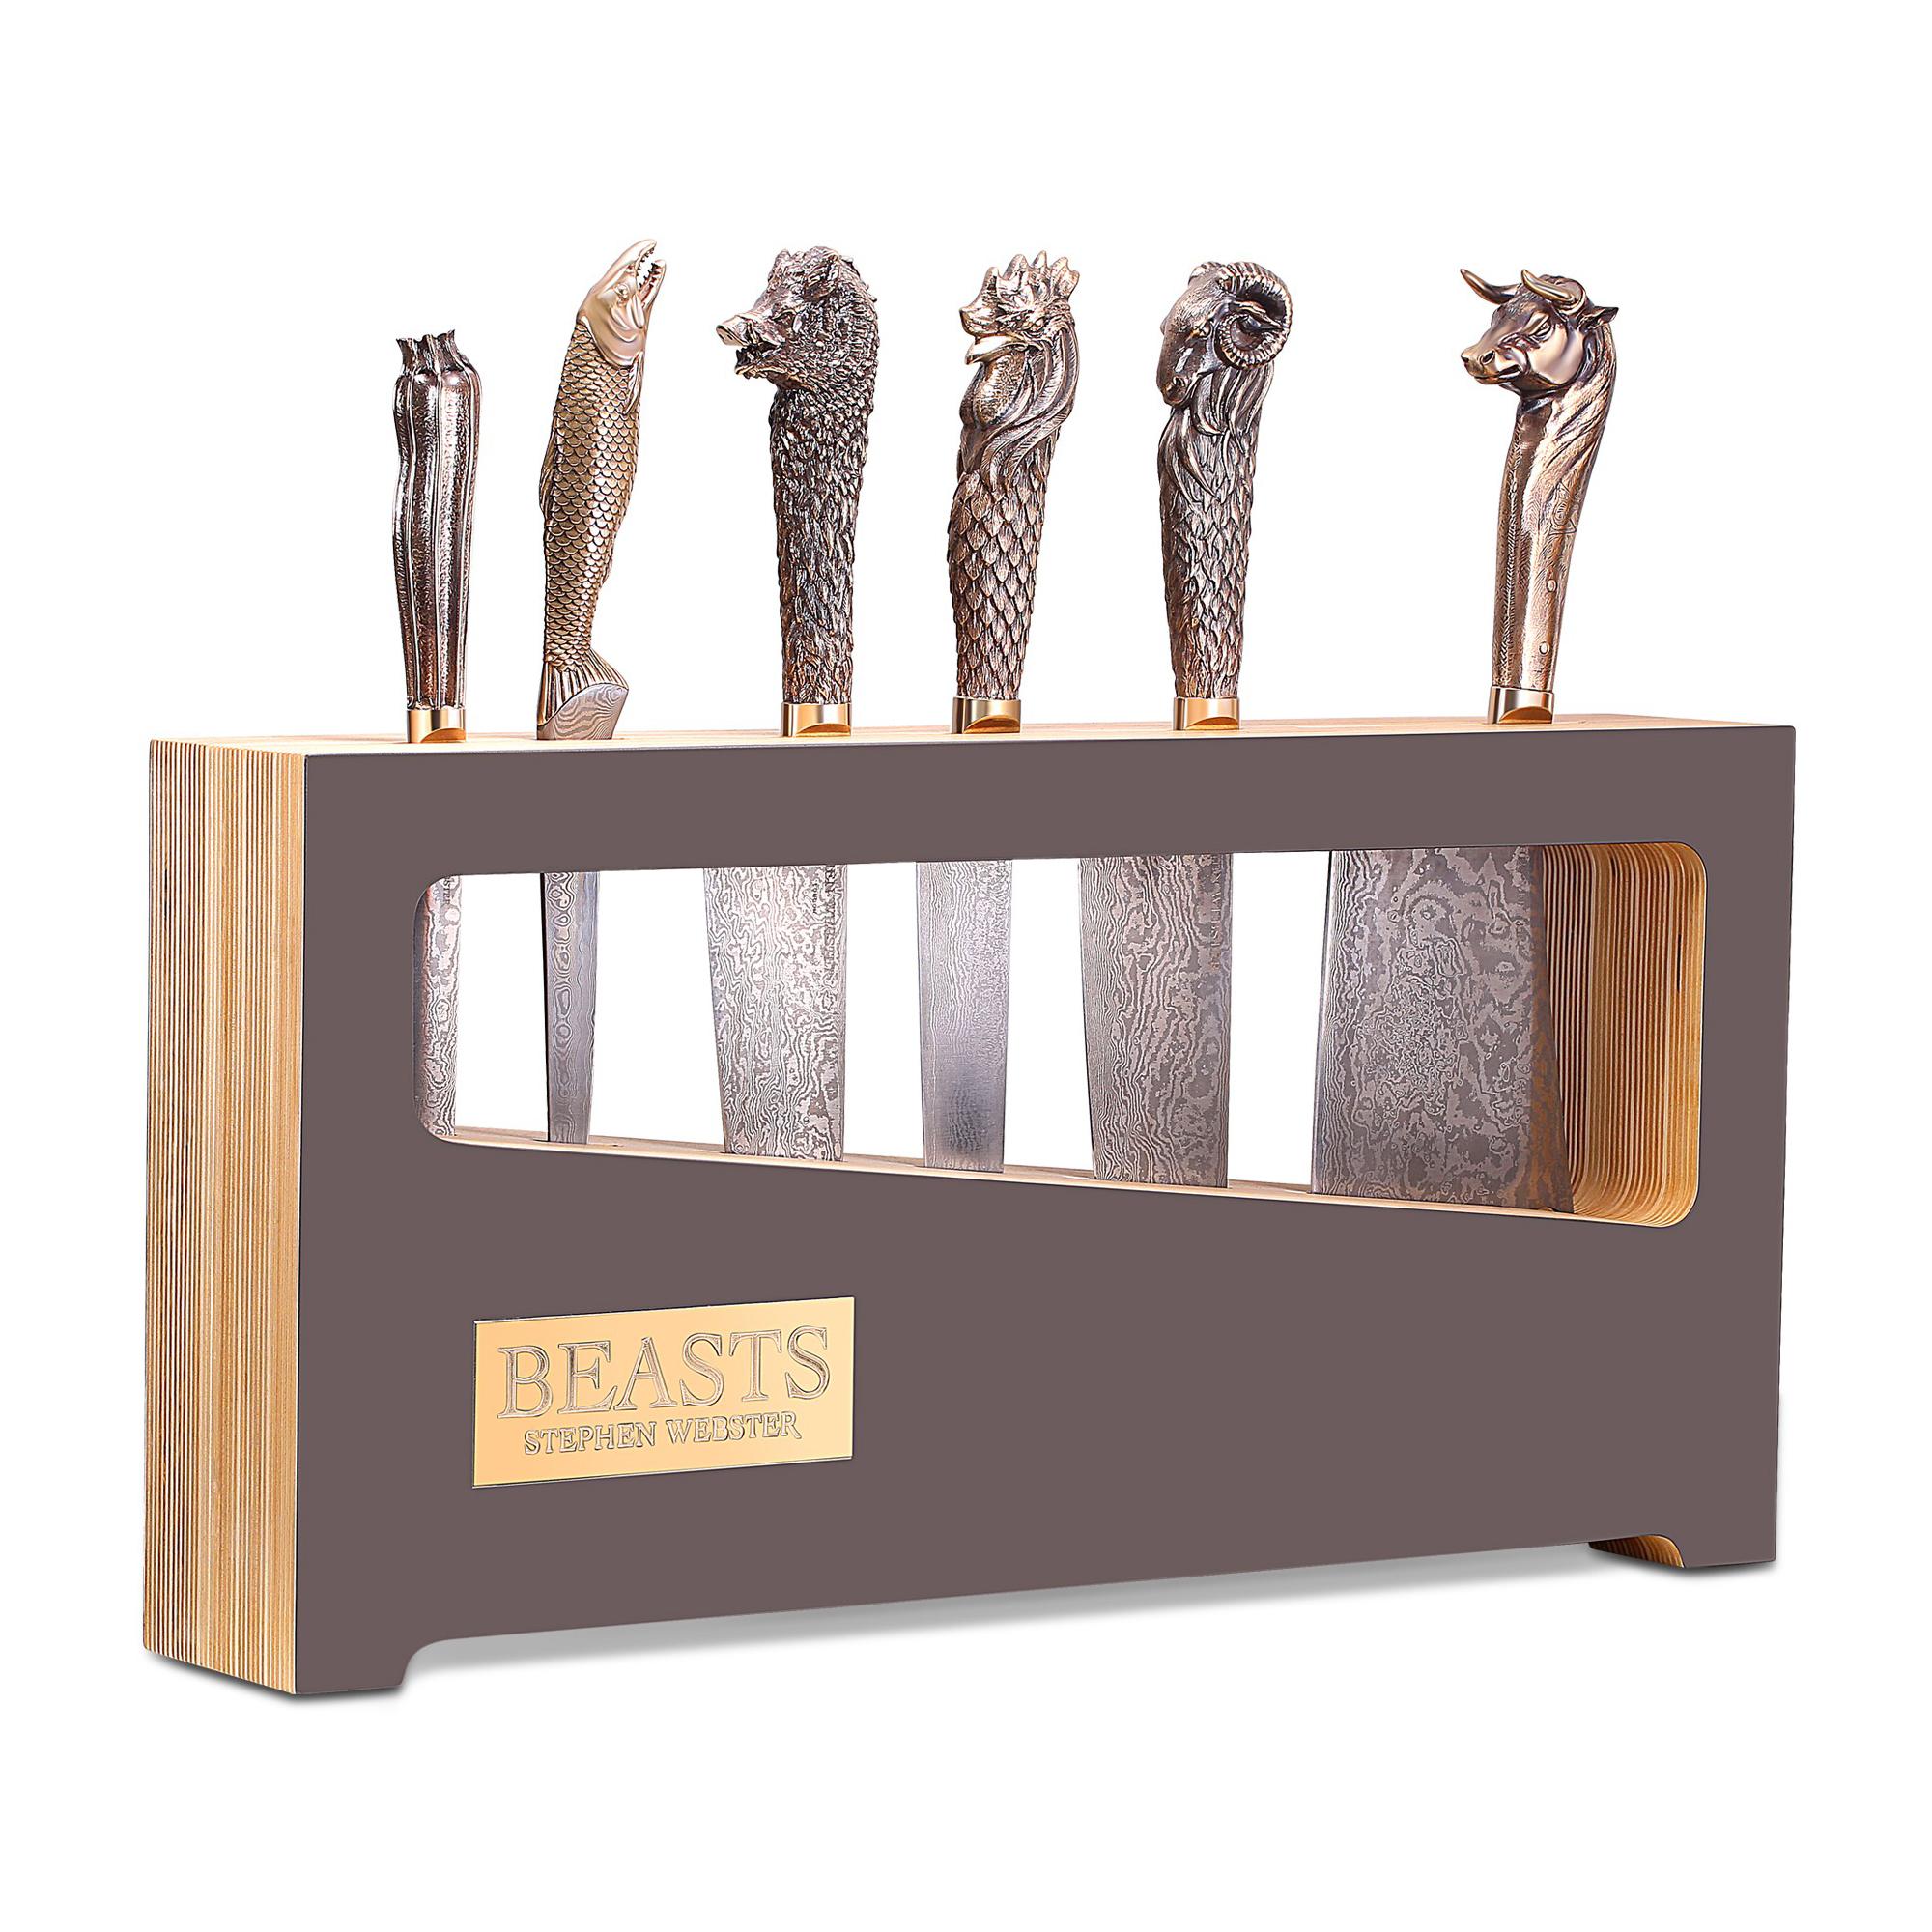 Beasts Chef's Knives - All with folded steel blades and bronze handles featuring a Boar, a Bull, a Ram, a Rooster, a Sockeye Salmon and a Courgette with knife block.

Please enquire for your exclusive price if your delivery country is outside of the